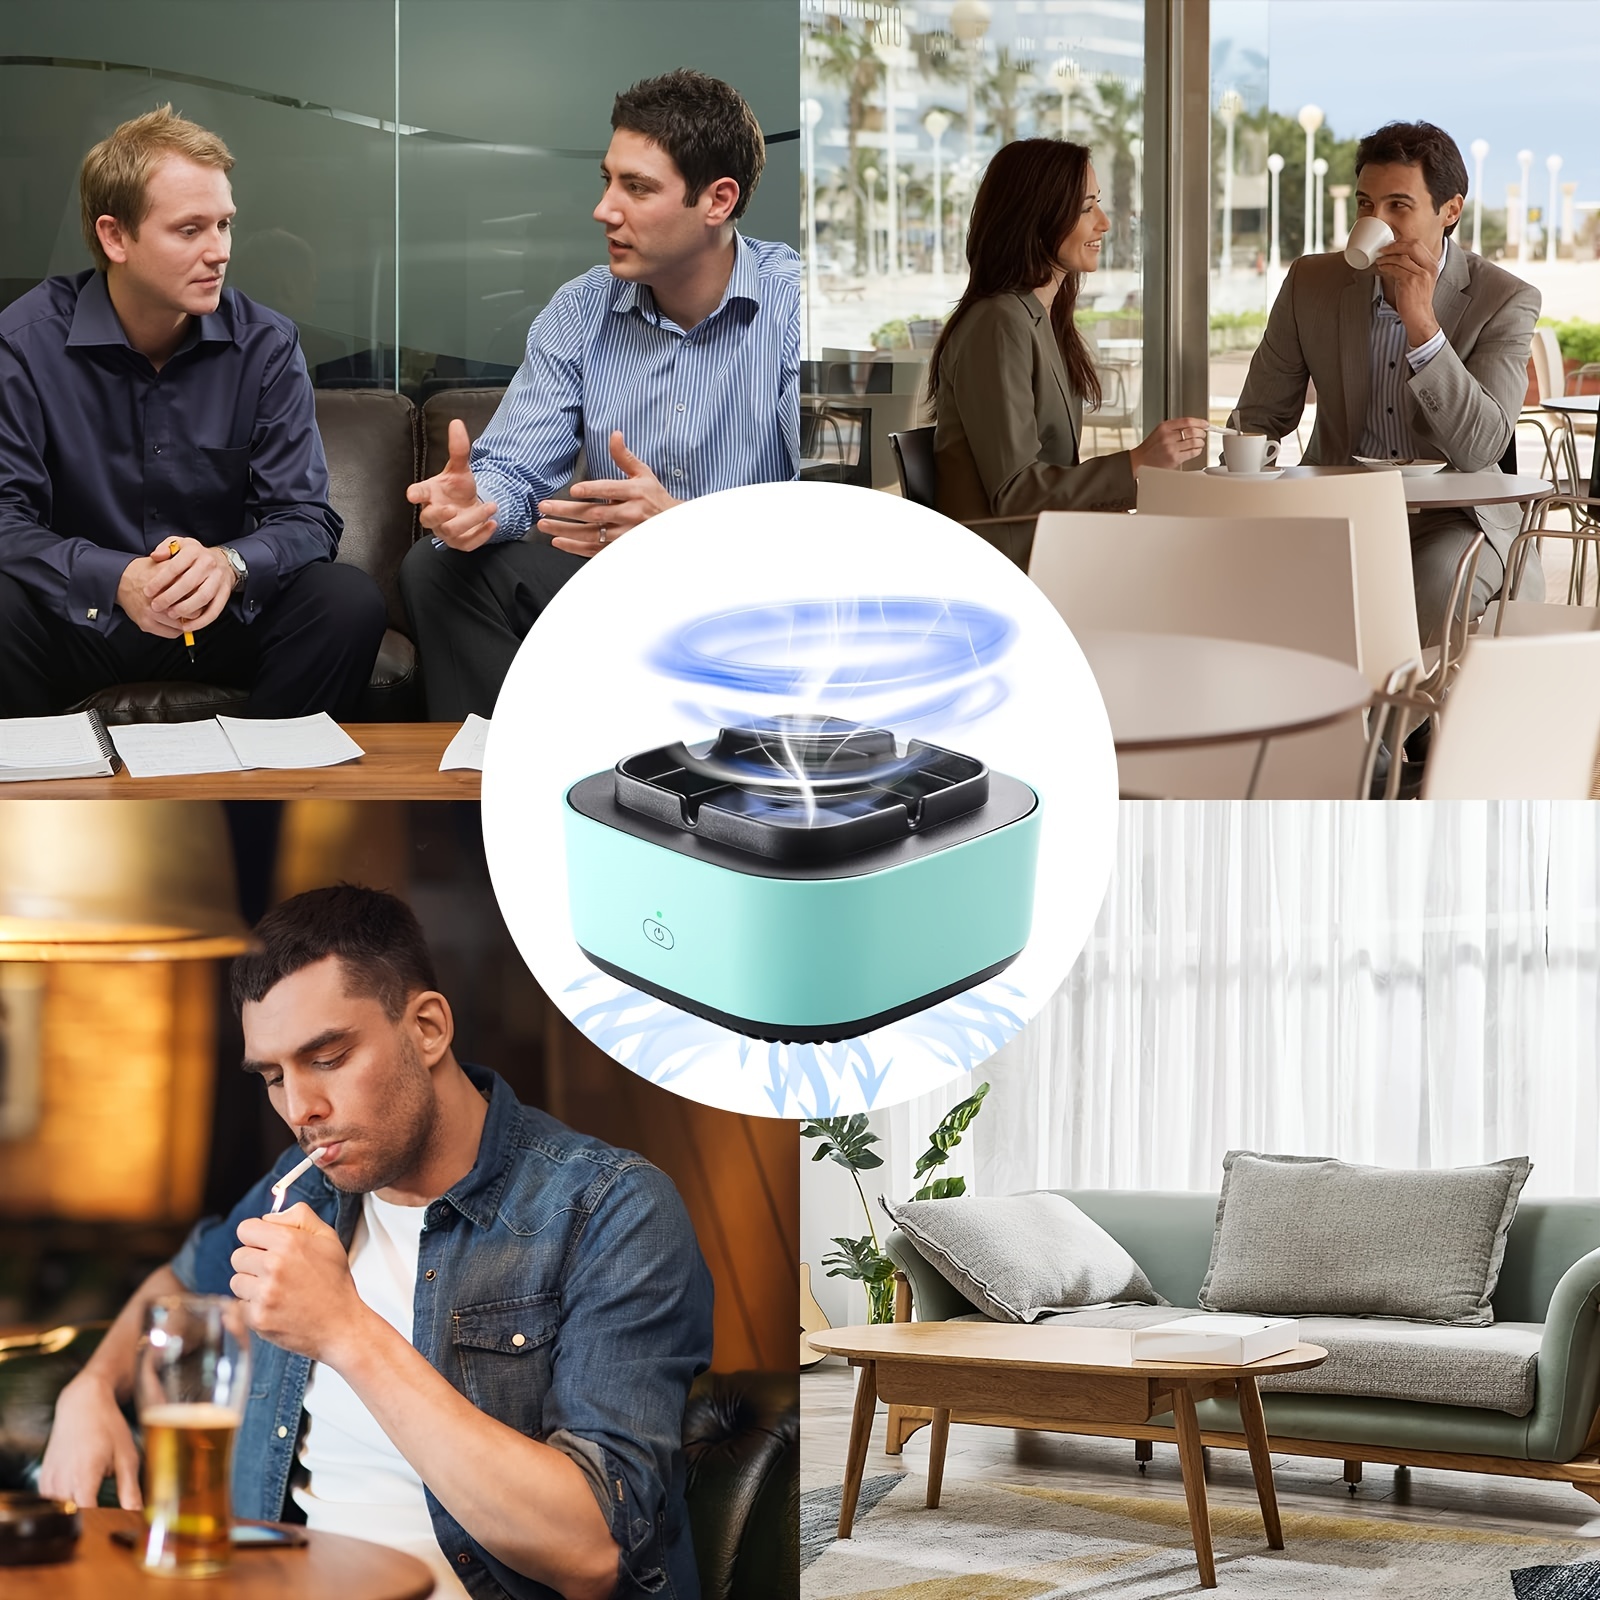 Intelligent Ashtray Air Purifier 2 In 1 Household Desk Negative Ion Second  Hand Smoke Removal Ceramic Ashtray From Fluency, $46.23